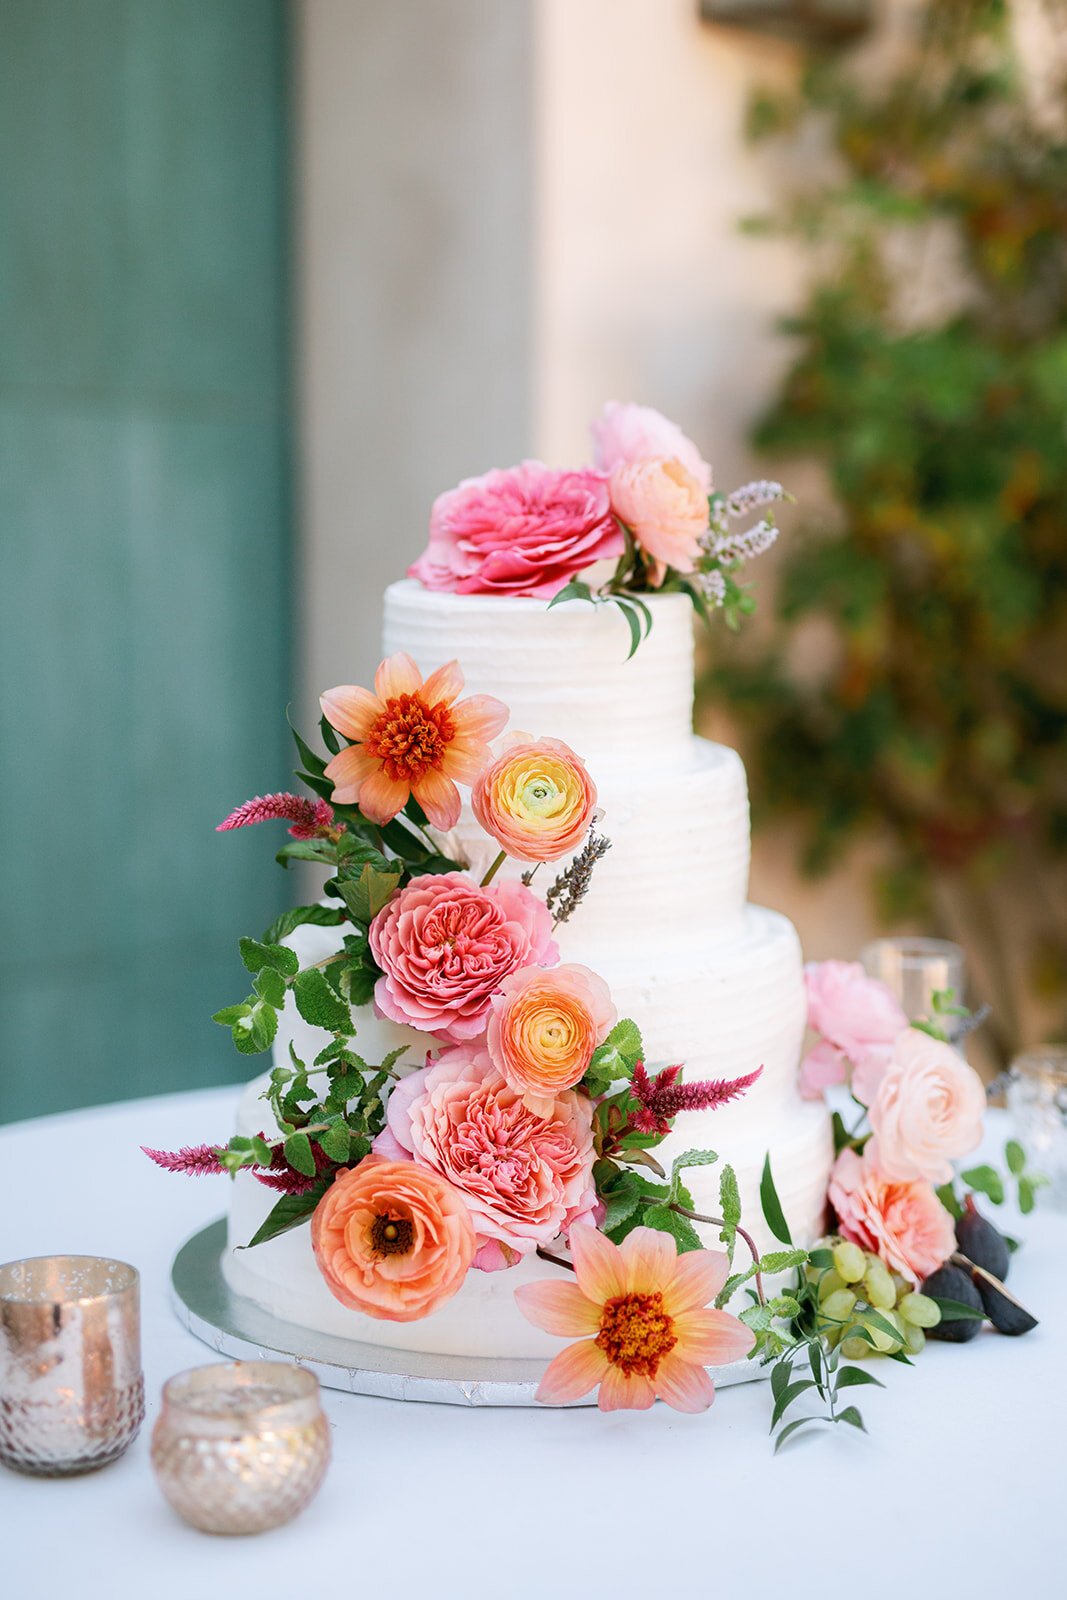 www.santabarbarawedding.com | The Little Things Bakery | Anna Delores Photography | Three Tier White Wedding Cake with Pink and Orange Flowers